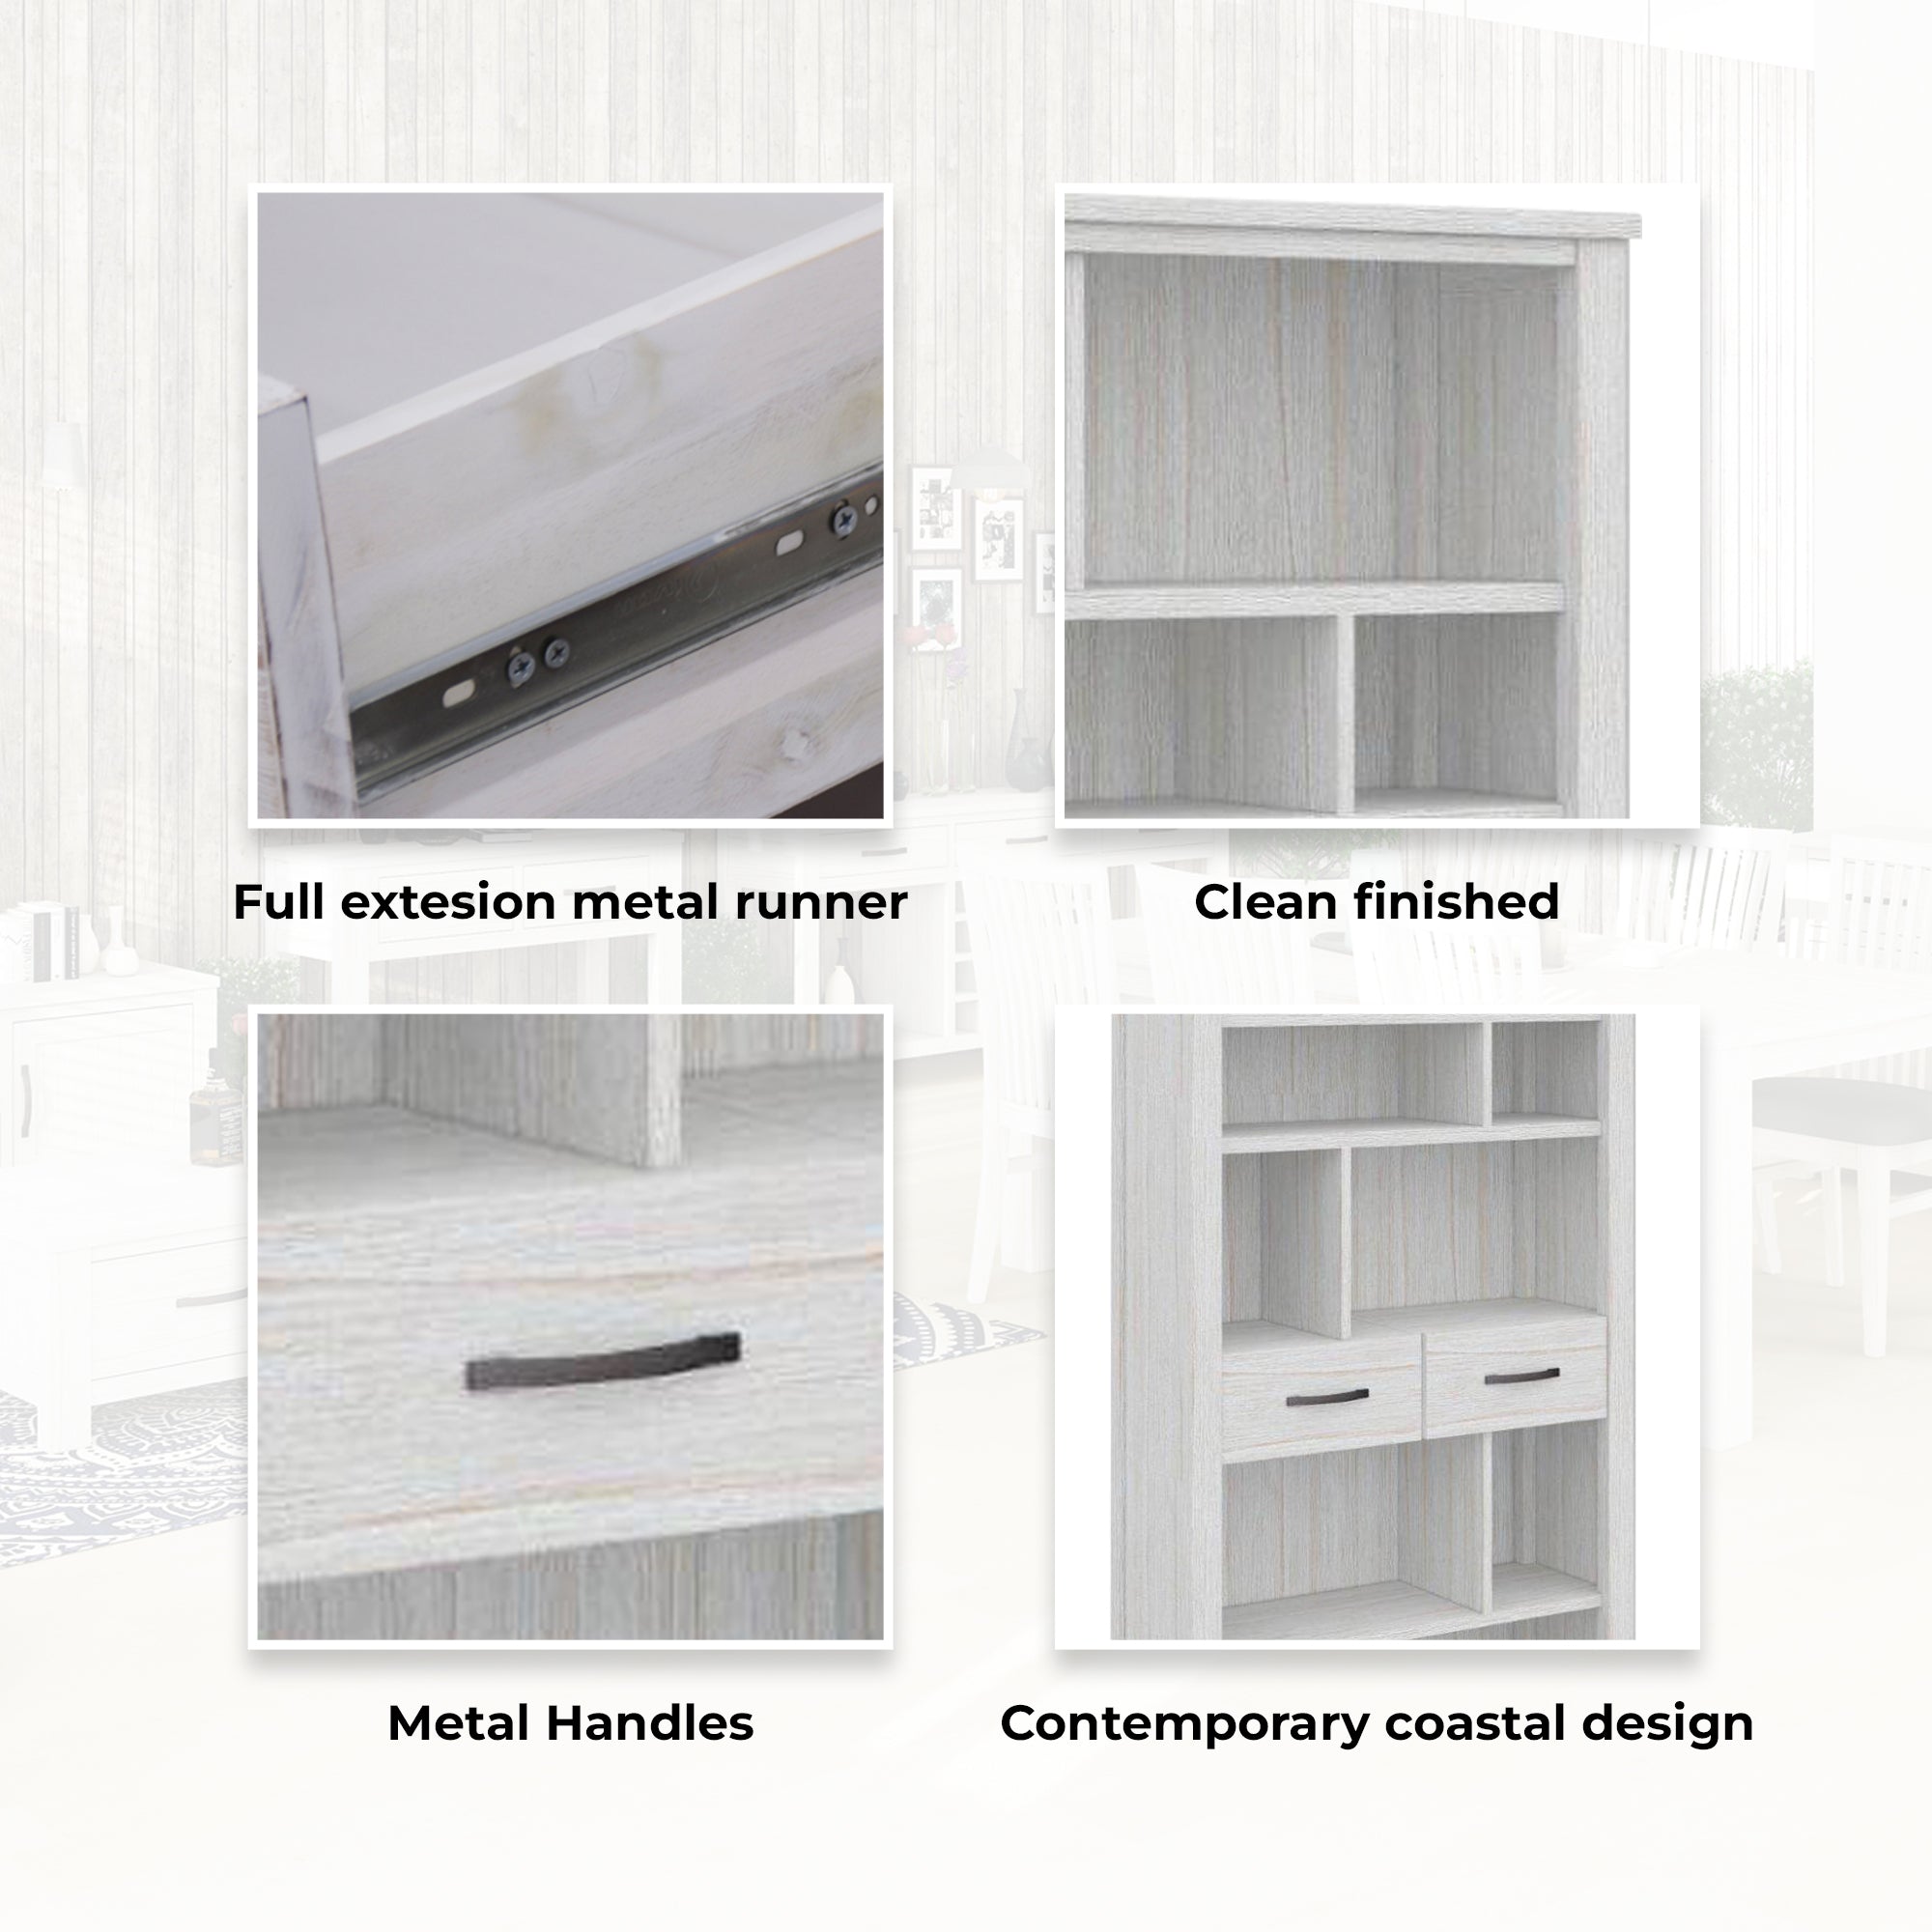 Foxglove Bookshelf Bookcase 5 Tier 2 Drawers Solid Mt Ash Timber Wood - White-Bookcases &amp; Shelves-PEROZ Accessories